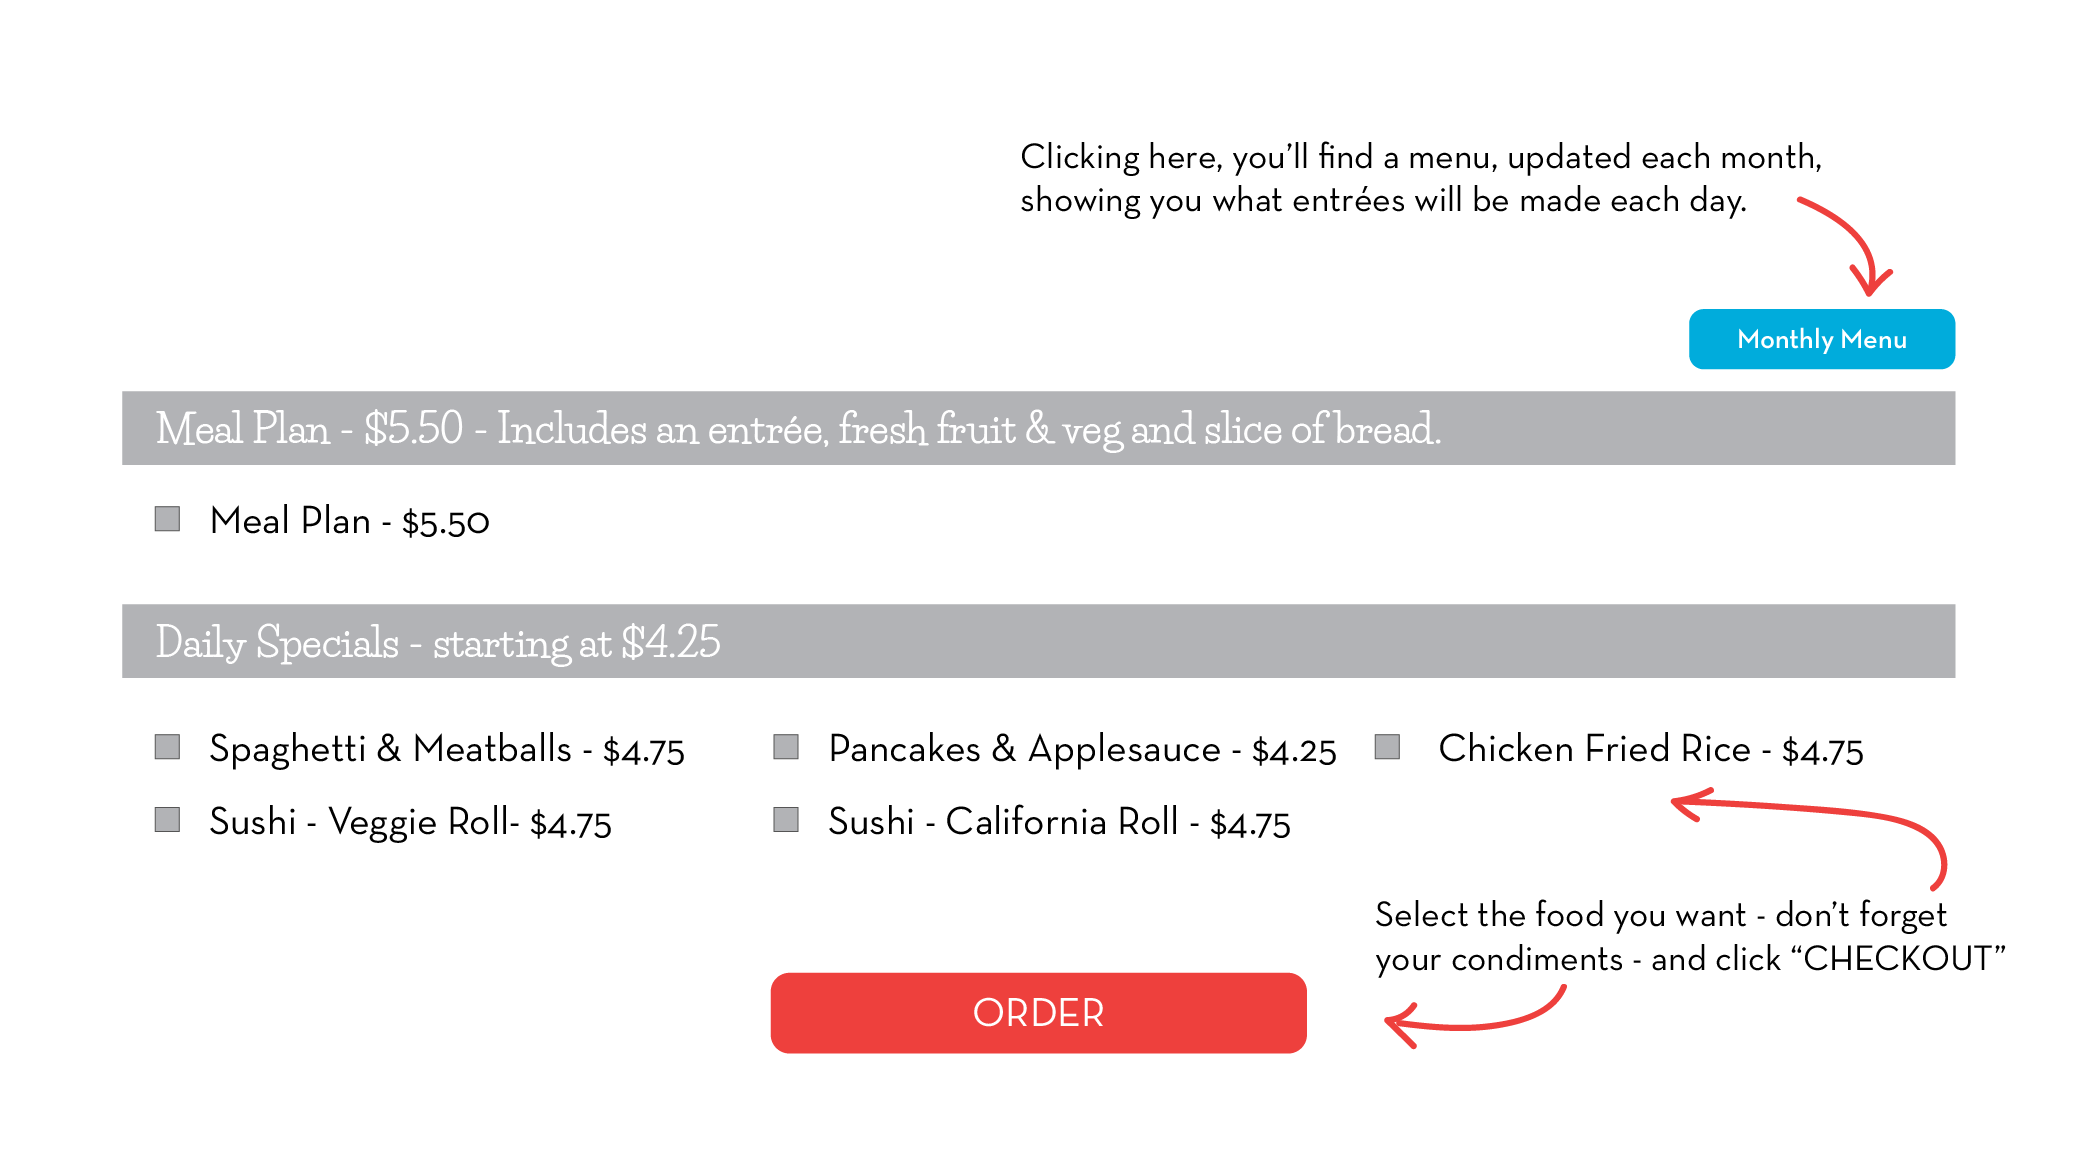 Select your order before clicking 'ORDER'. This will take you to an Order Details page.